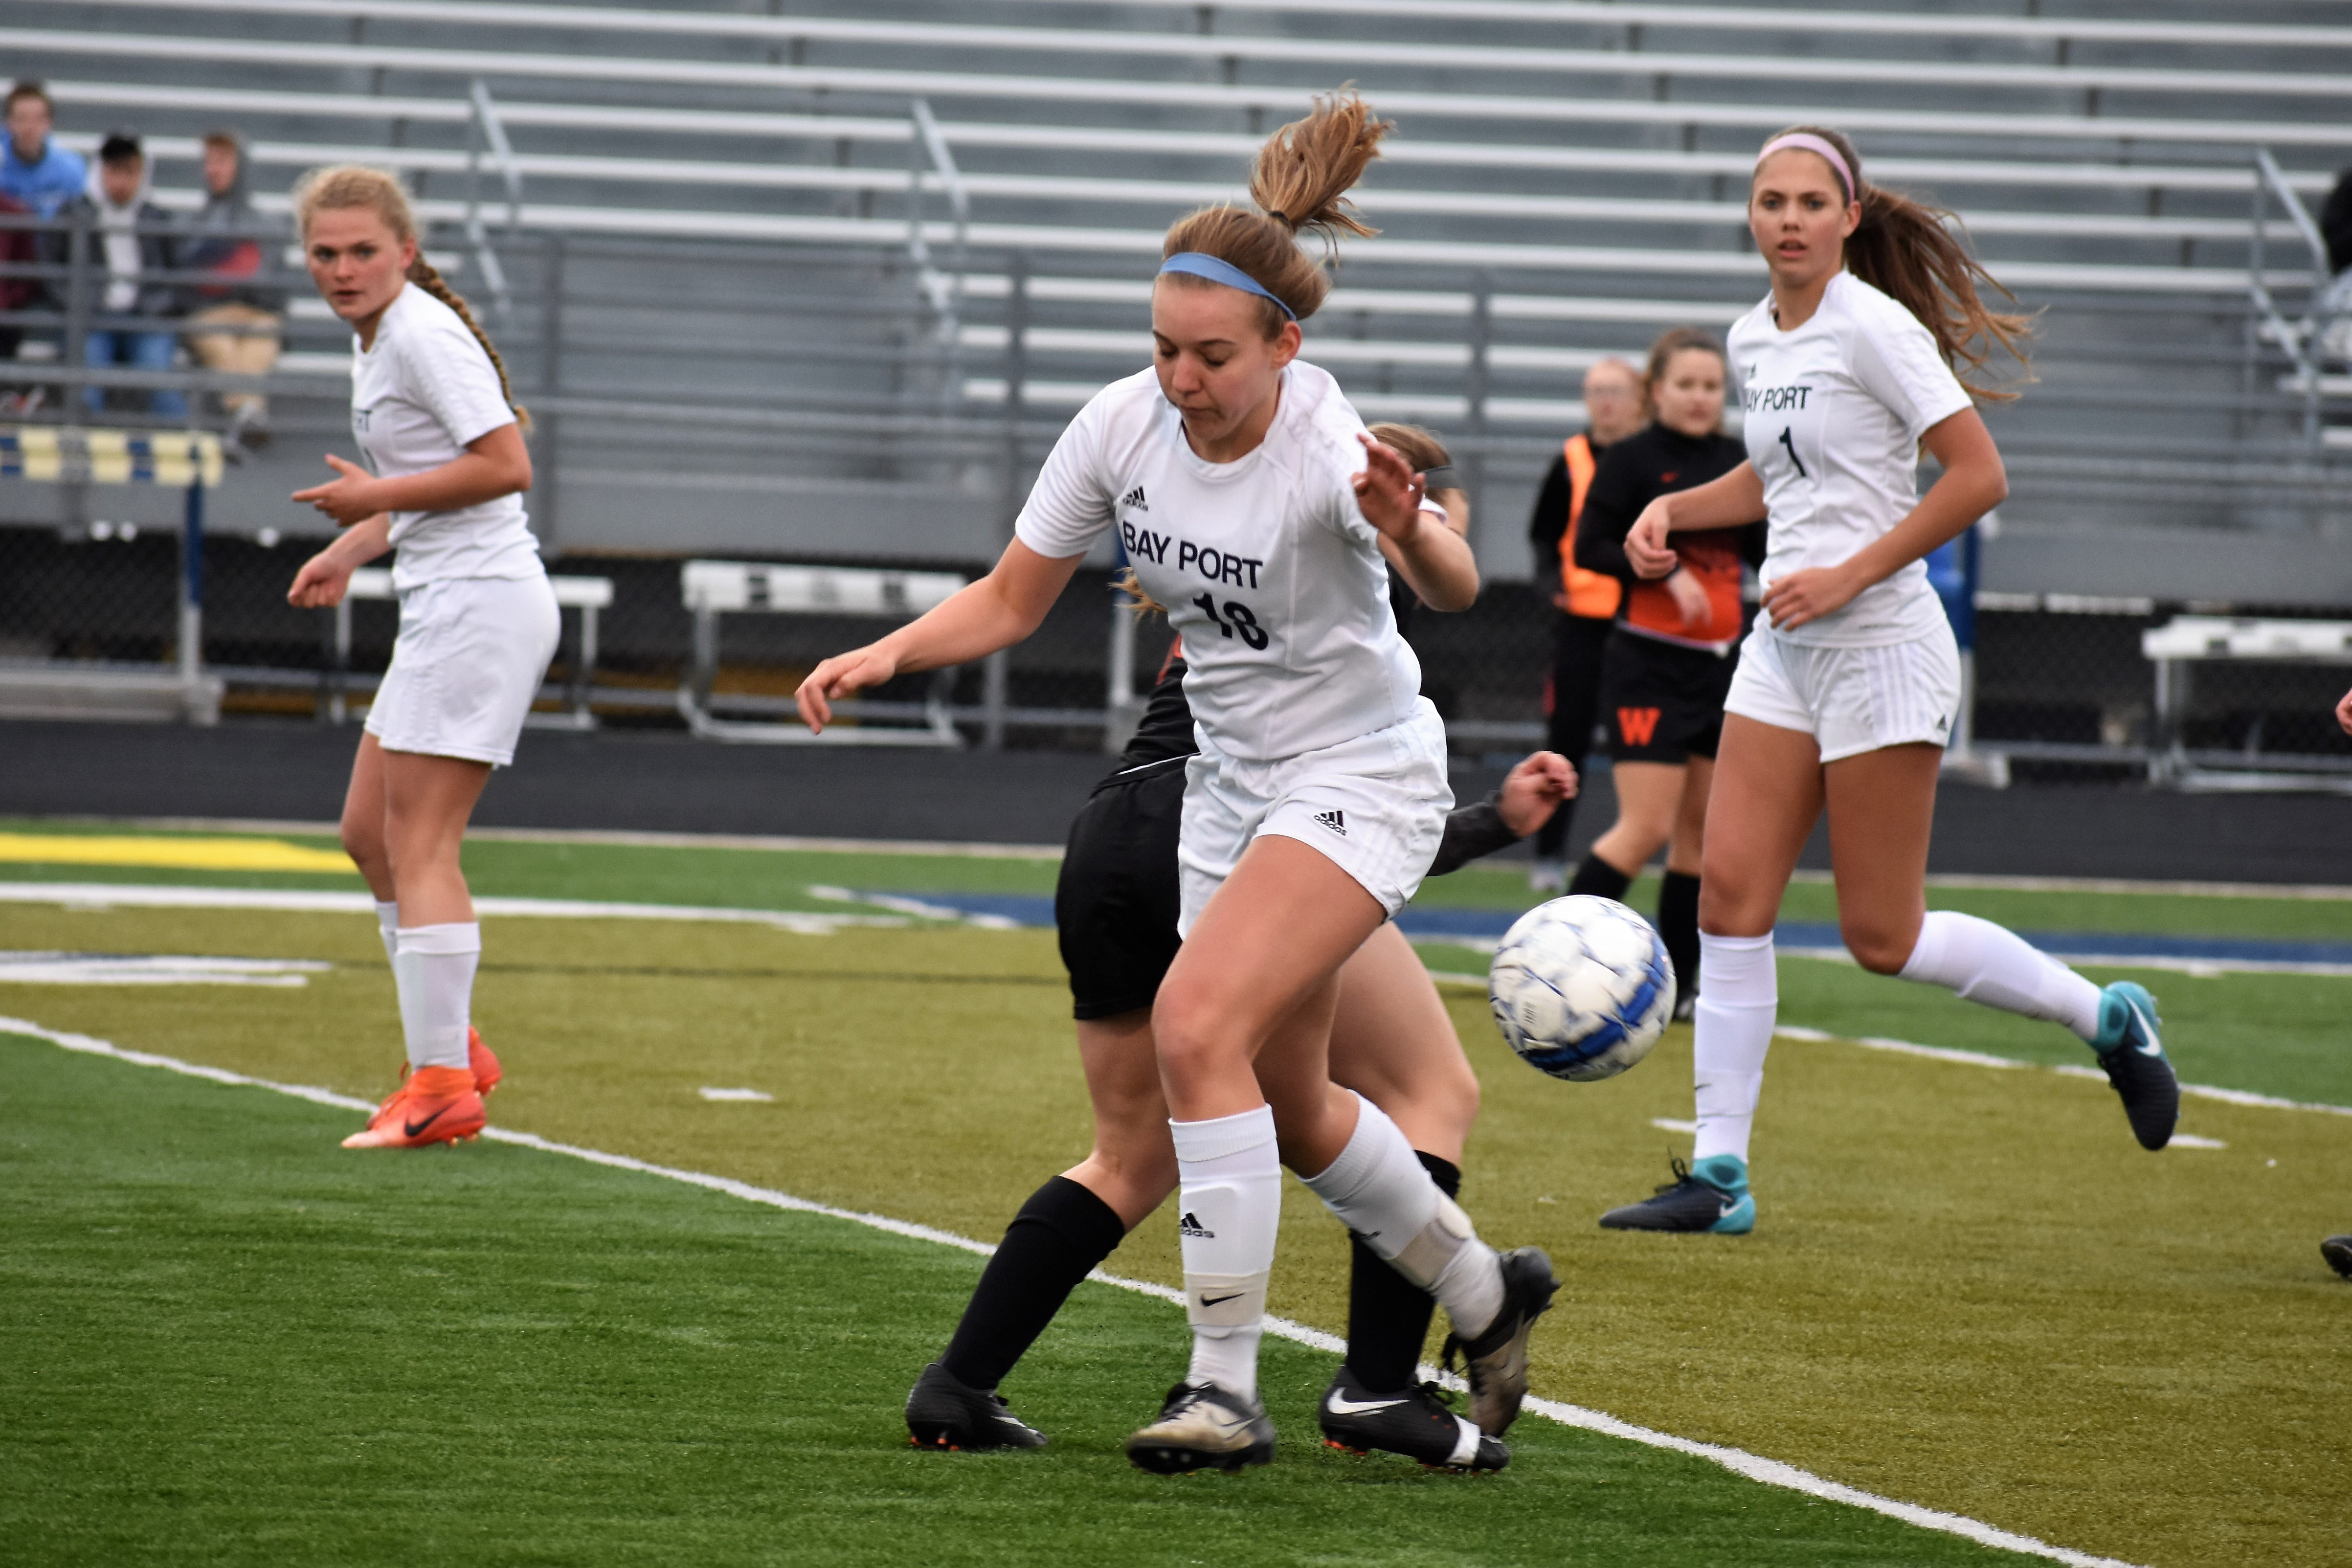 Hess’ hat trick leads Pirates to opening-season win